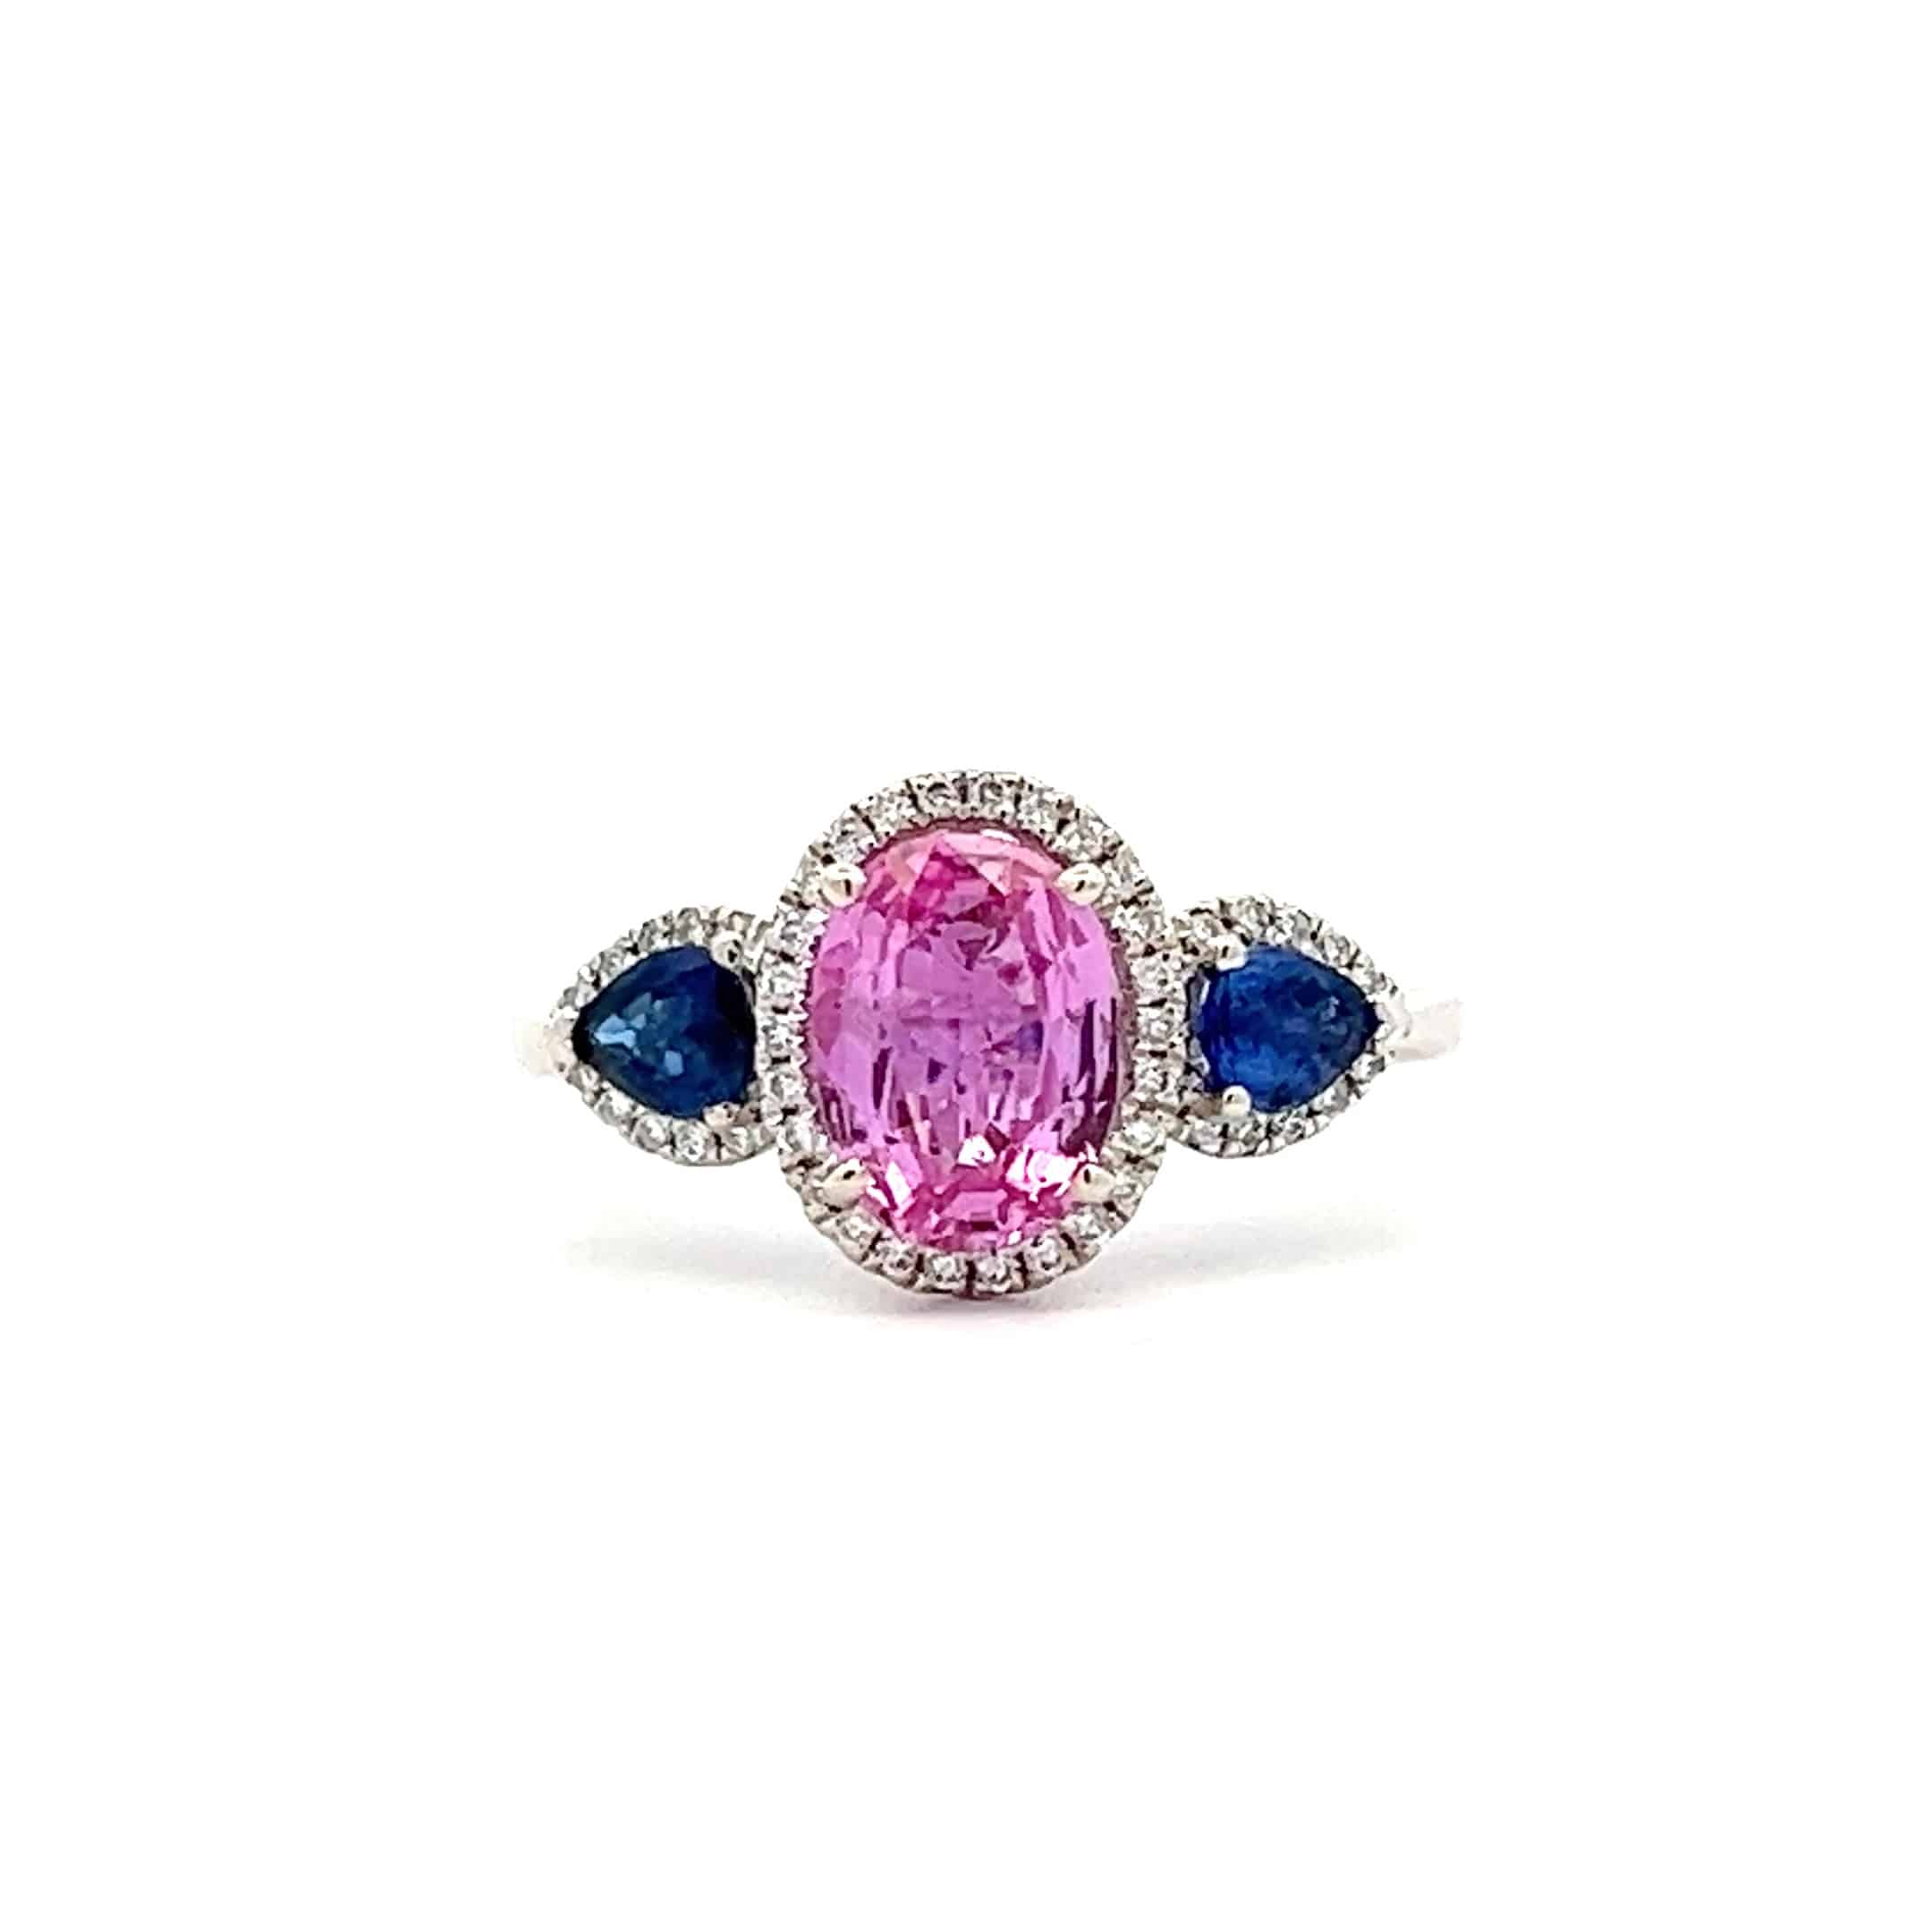 1.40ct Oval Pink Sapphire, 0.63ct Brilliant Cut Diamond Ring with Pear Shaped Blue Sapphires – 18ct White Gold